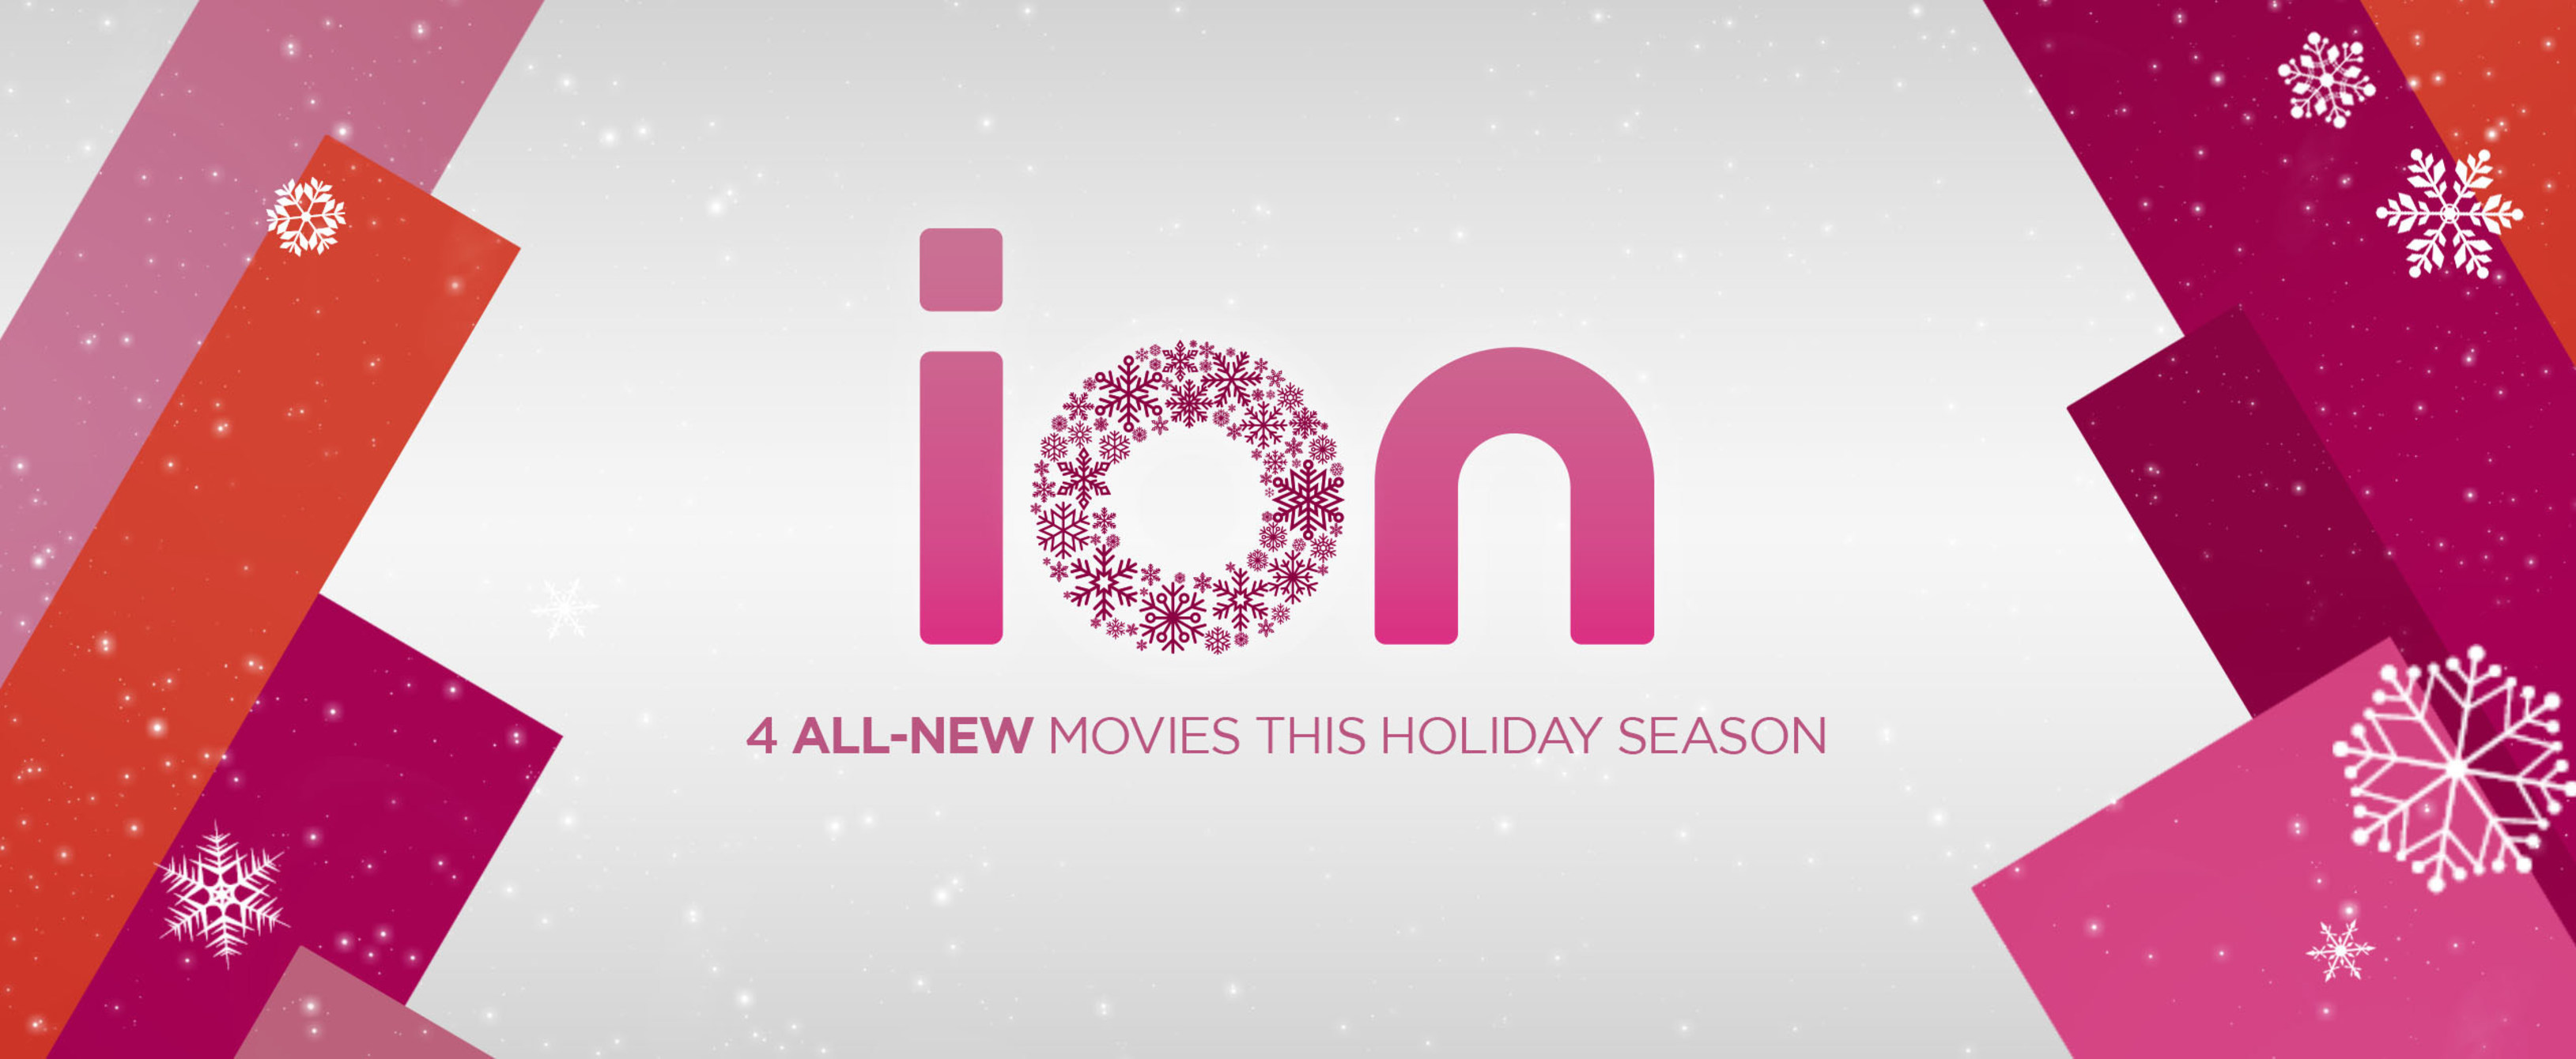 Scripps Networks celebrates the holidays with five new original movies